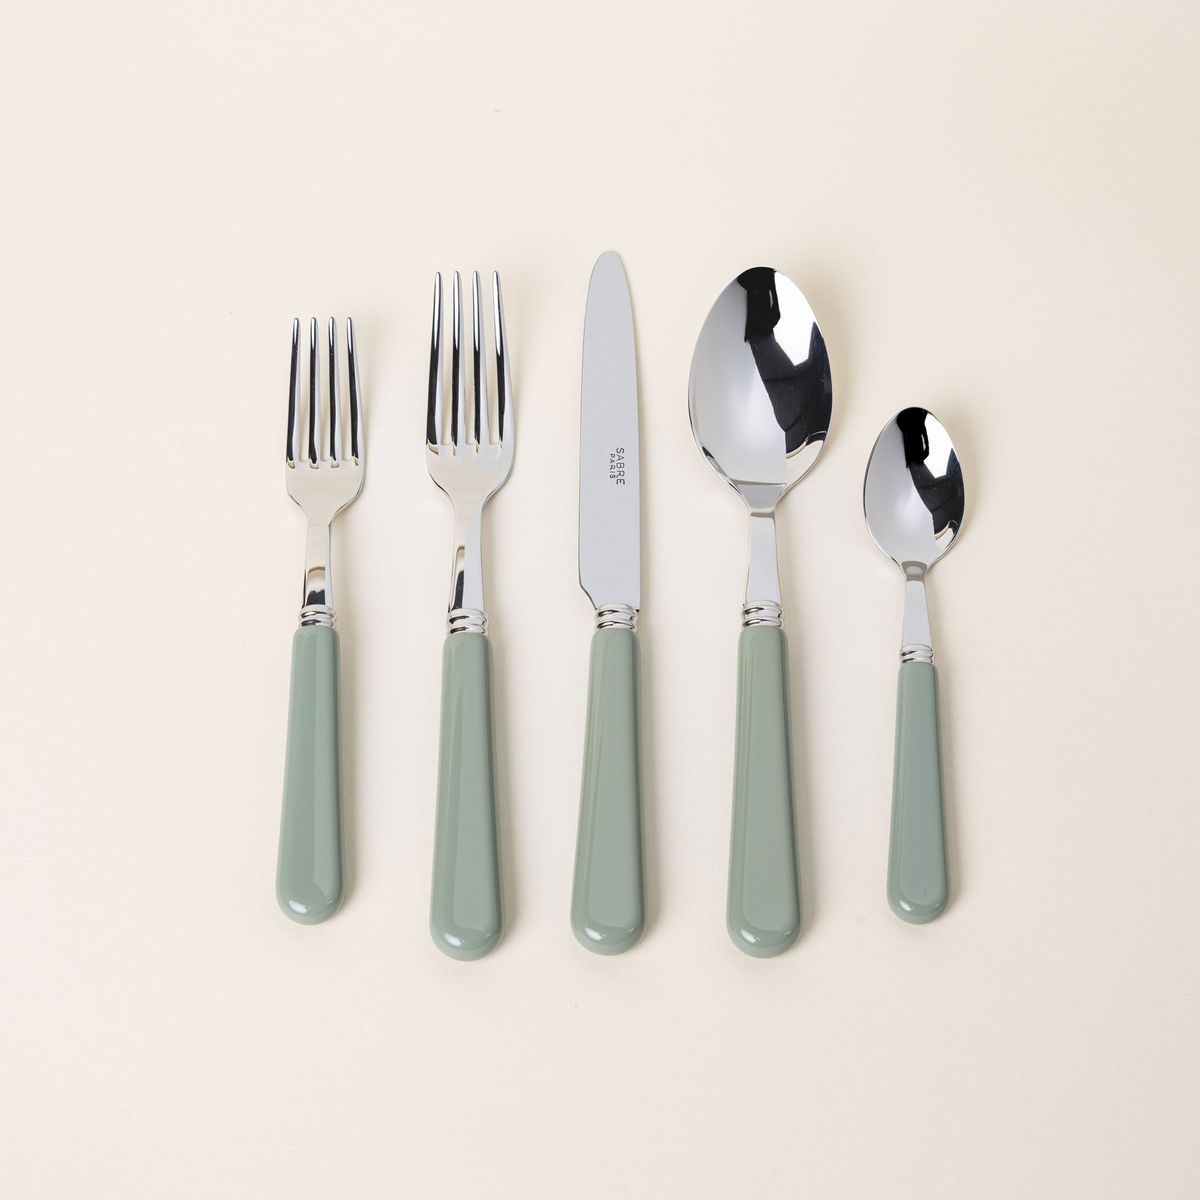 A five piece flatware set with shiny utensils and matte sage green handles